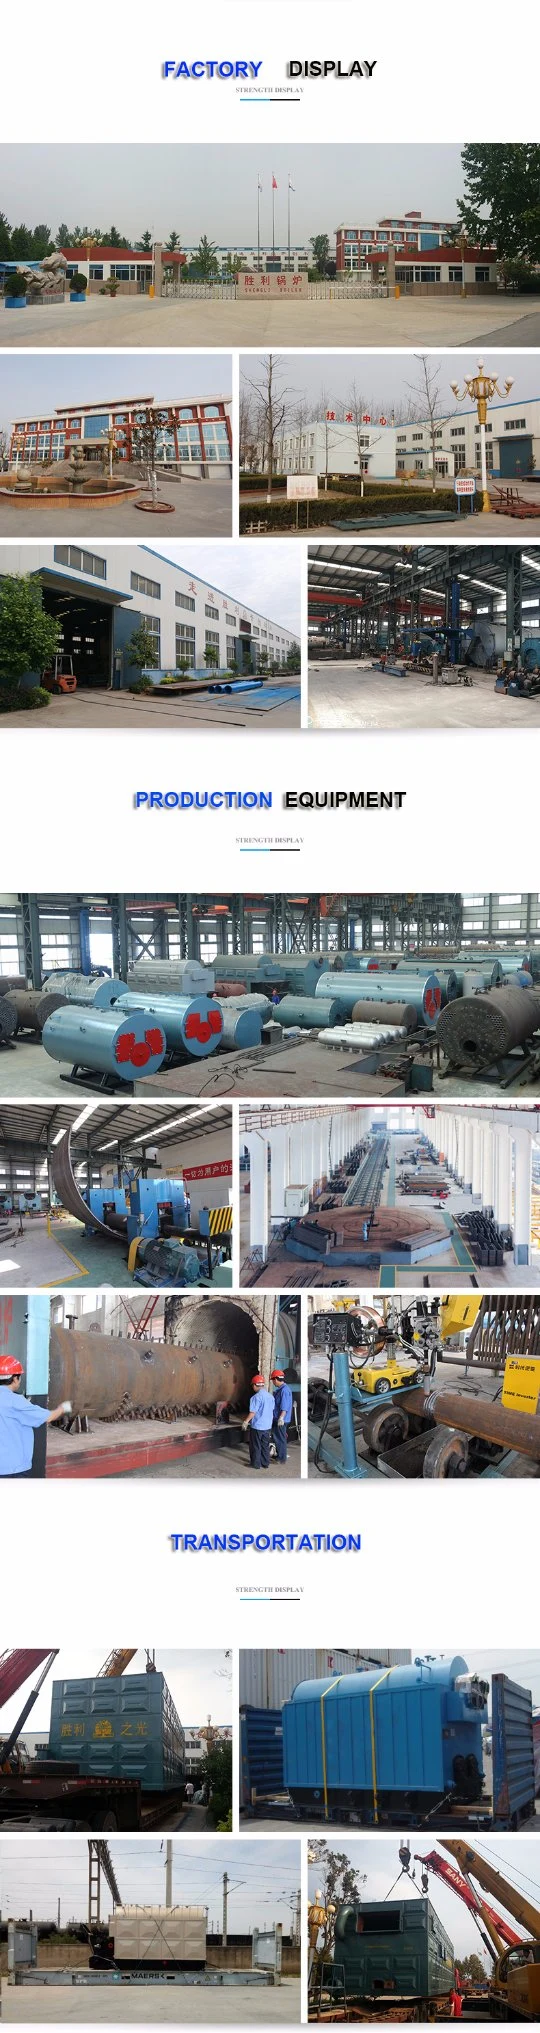 Low Pressure Automatic Coal Fired Boiler for Garment Factory